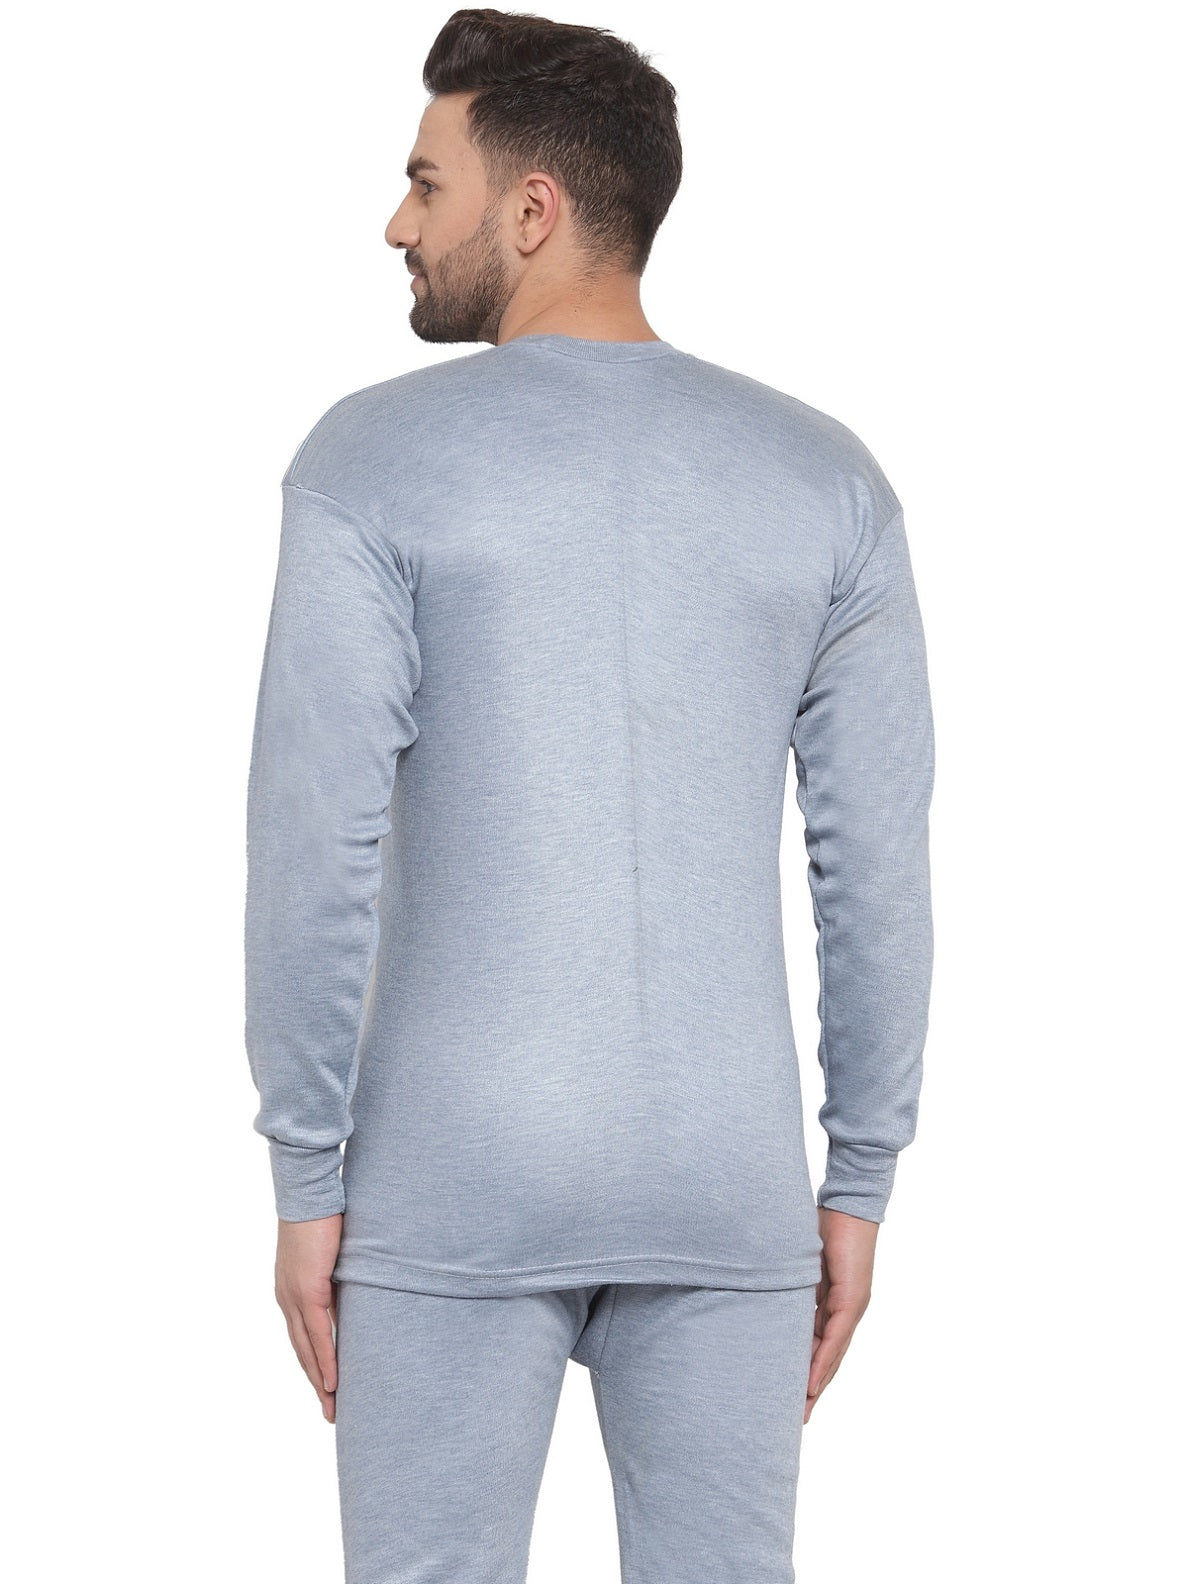 MEN'S SOLID ROUND NECK THERMAL TOP